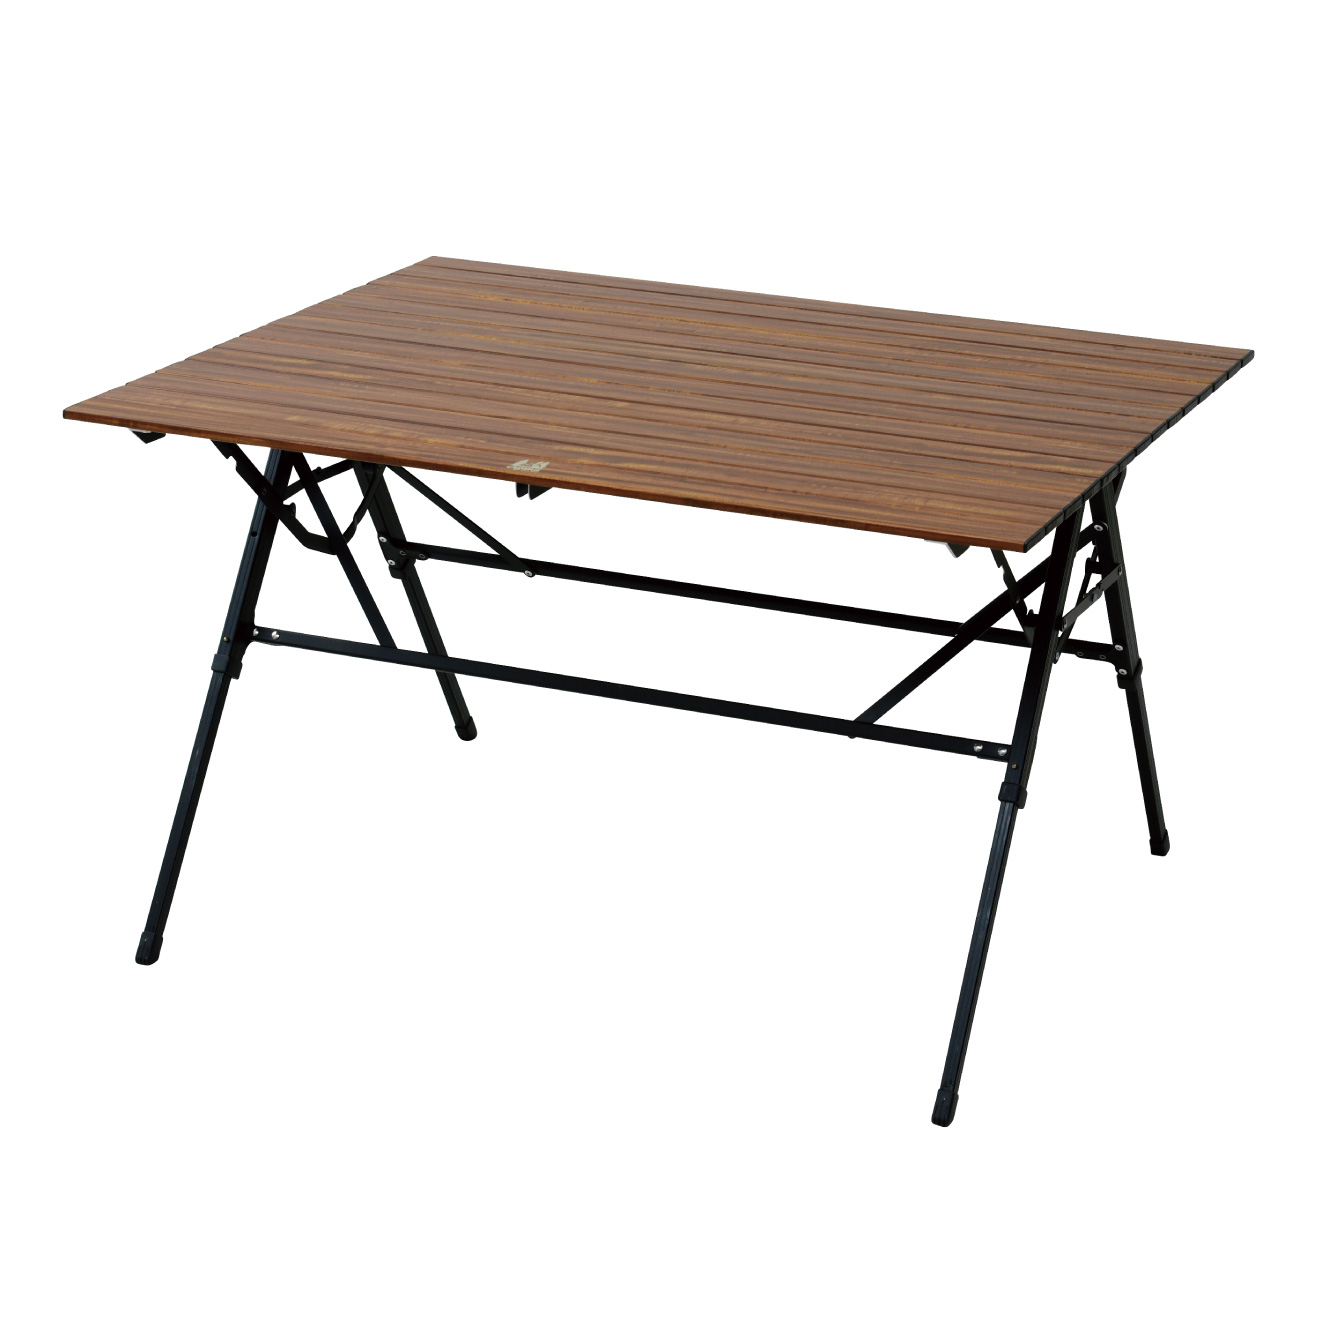 3 HIGH & LOW TABLE LONG